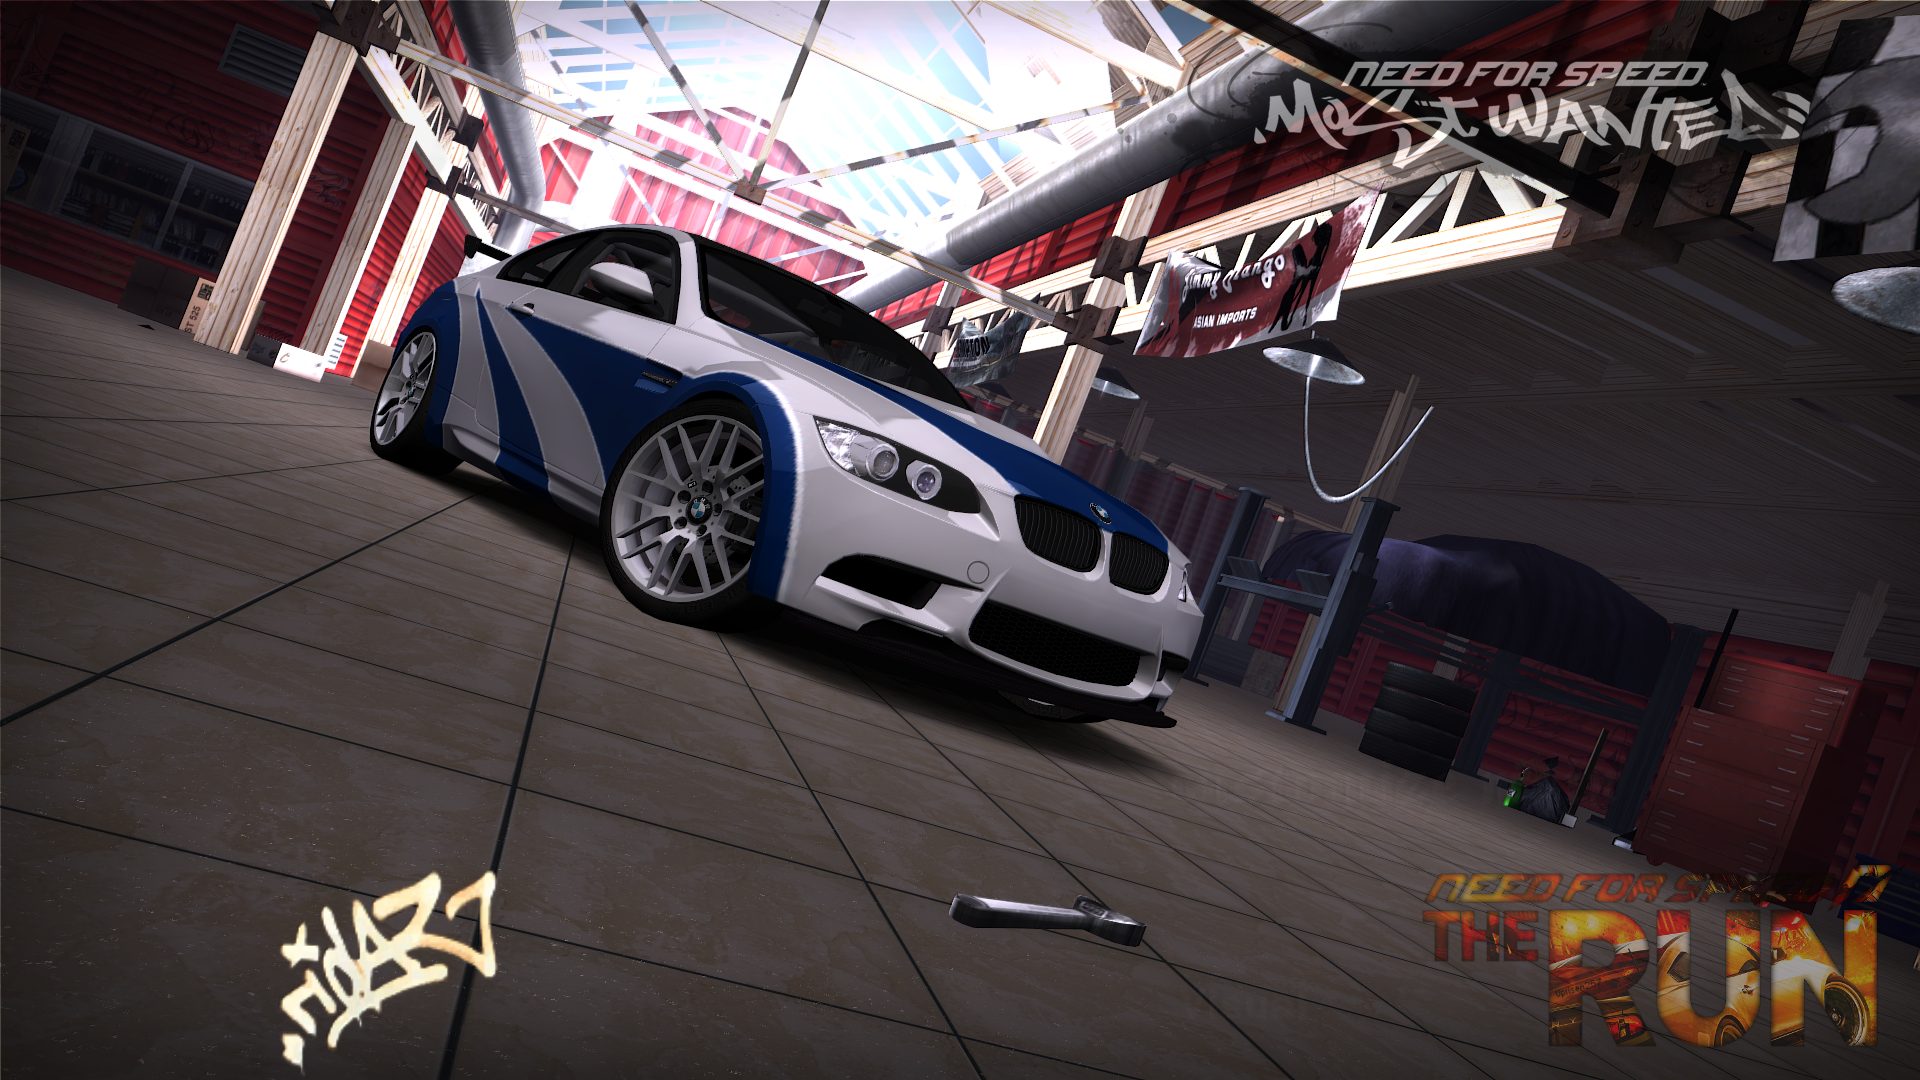 Need For Speed Most Wanted BMW M3 GTS MW-Edition